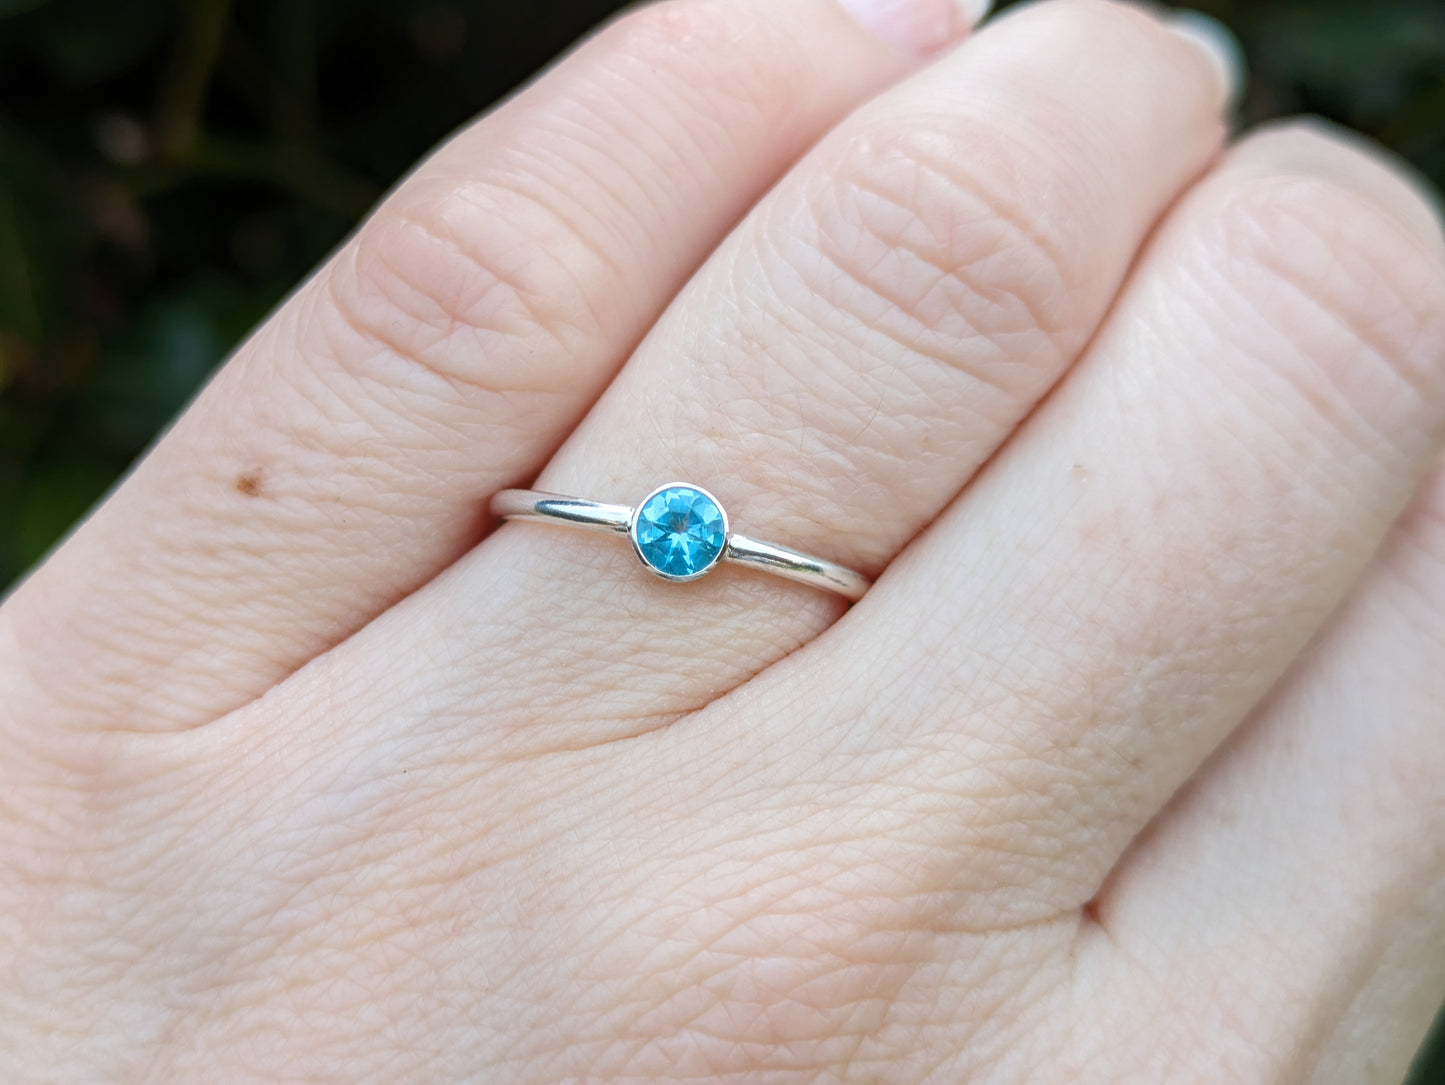 Apatite ring in sterling silver or gold.